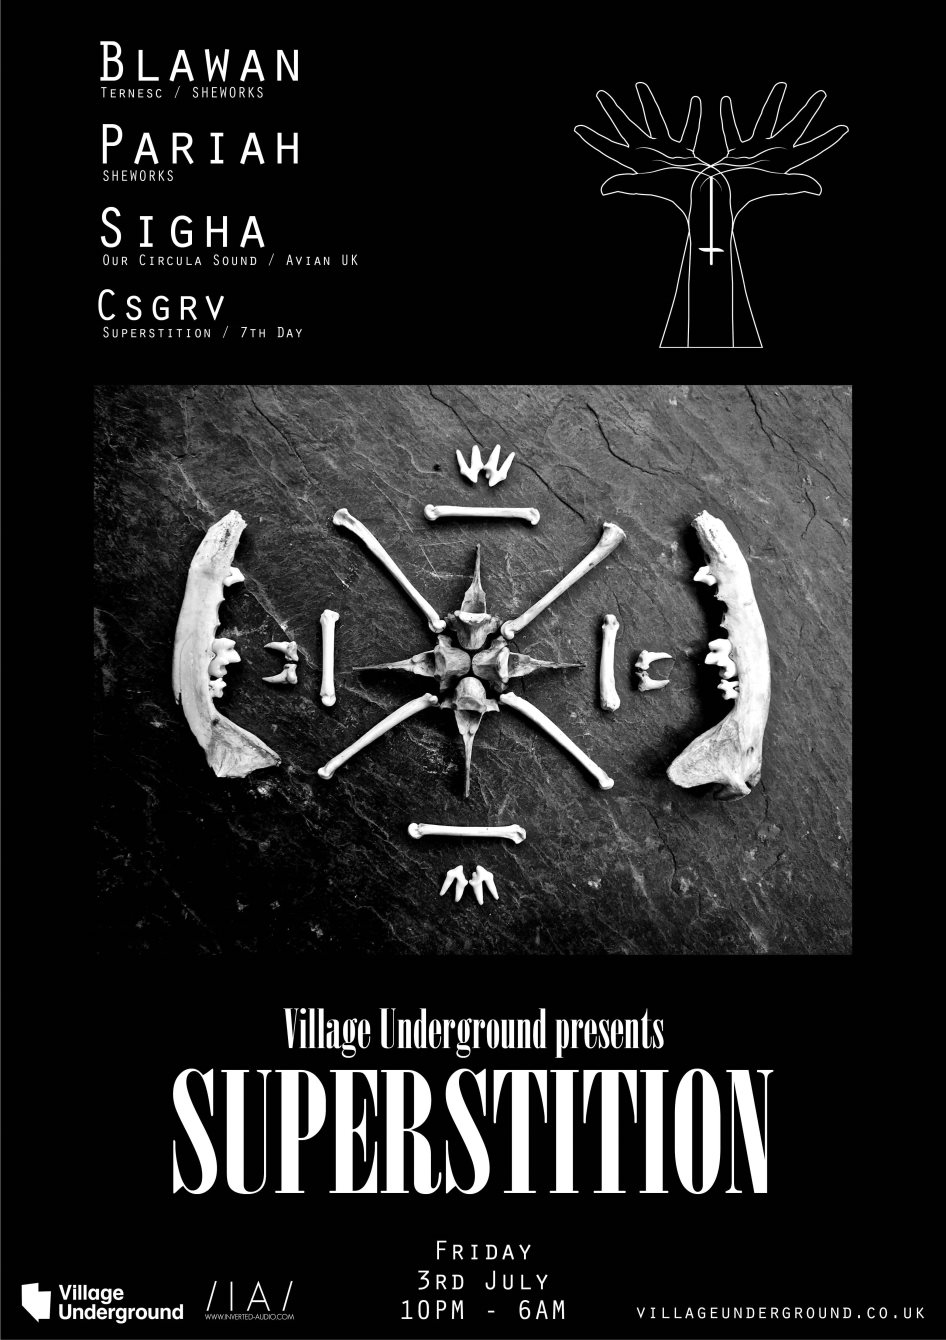 Superstition - Blawan, Pariah, Sigha and Csgrv - Flyer front